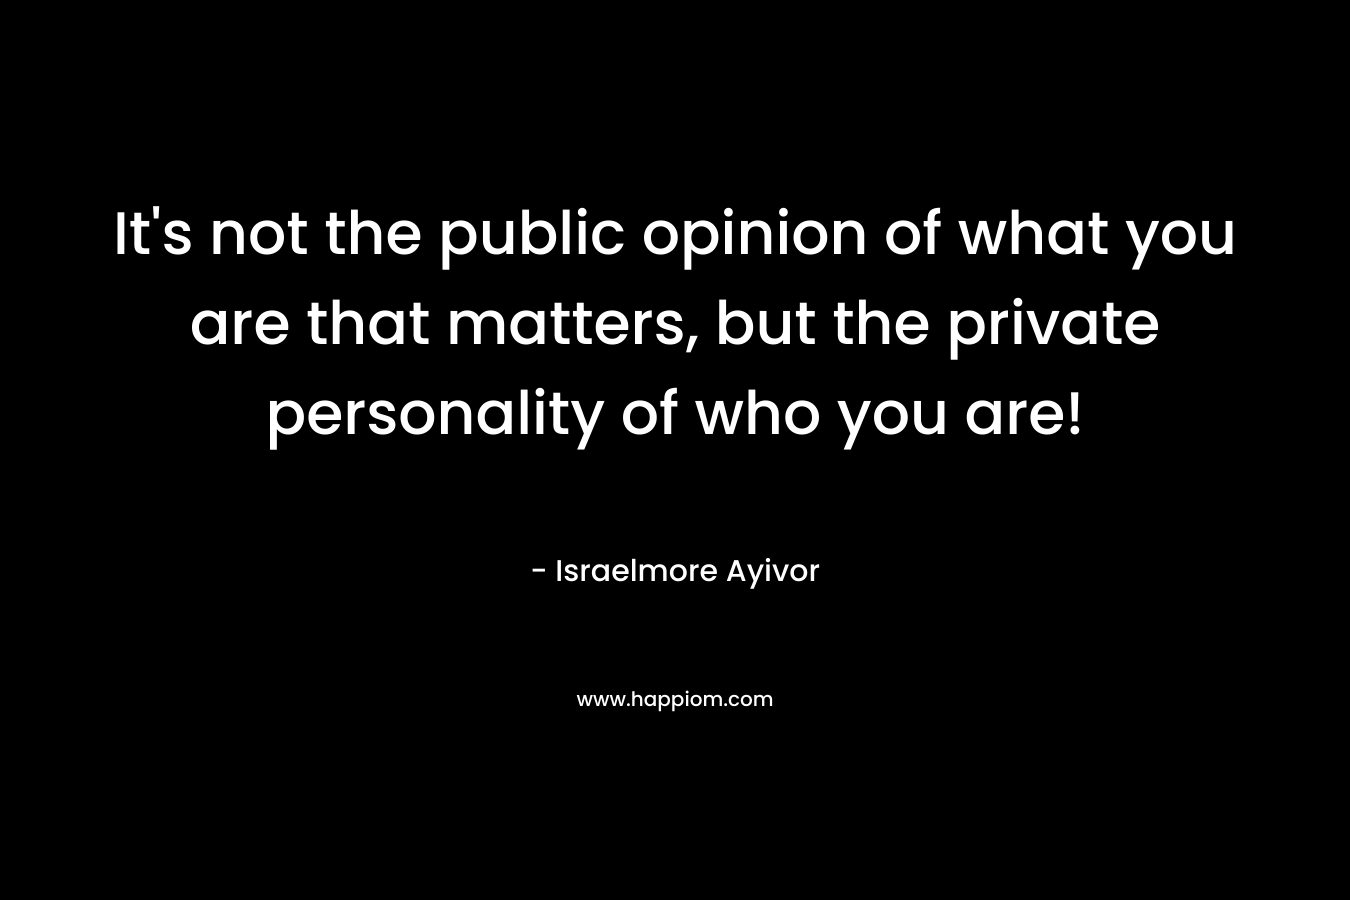 It's not the public opinion of what you are that matters, but the private personality of who you are!